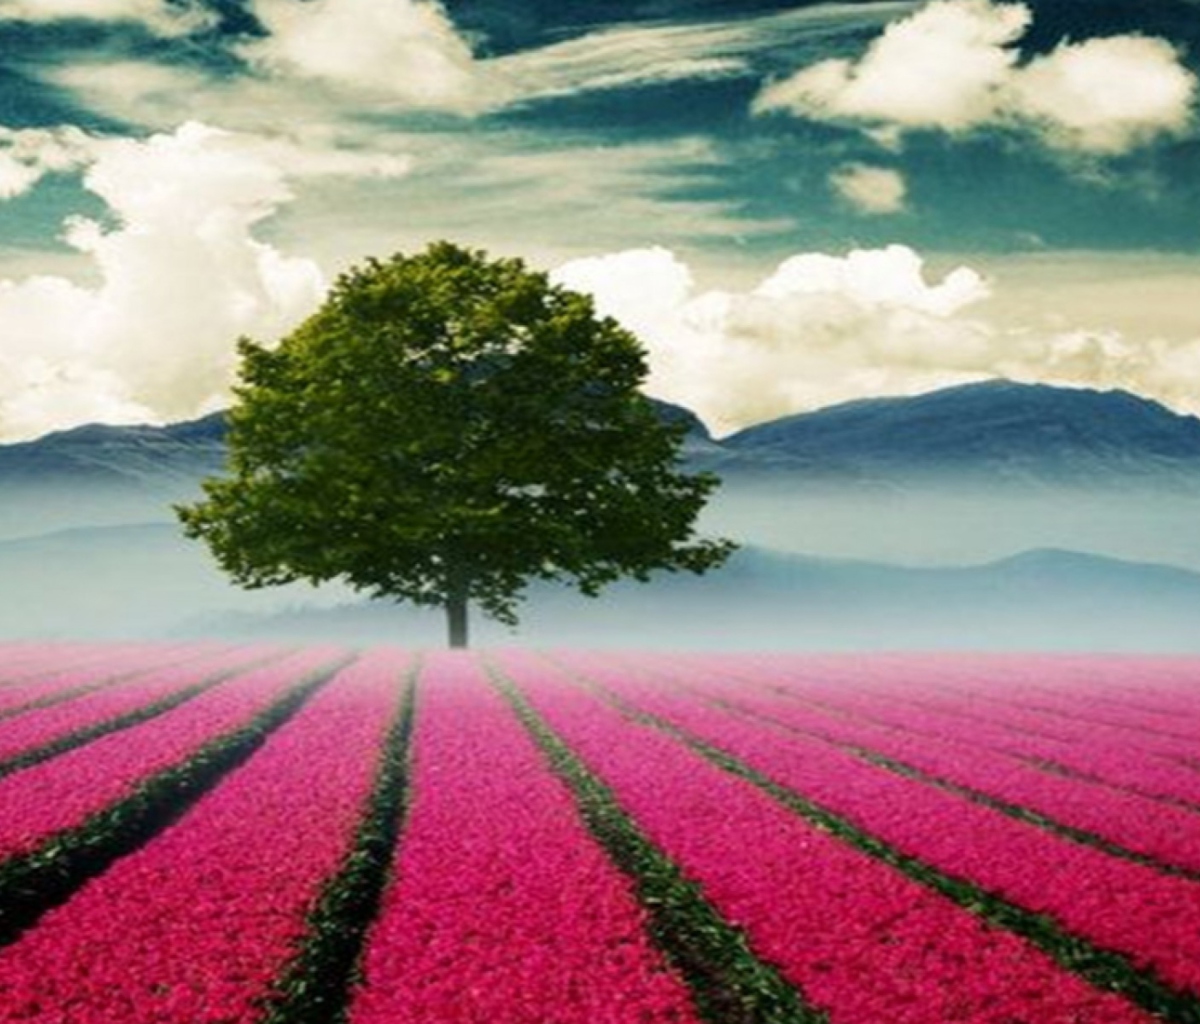 Das Beautiful Landscape With Tree And Pink Flower Field Wallpaper 1200x1024